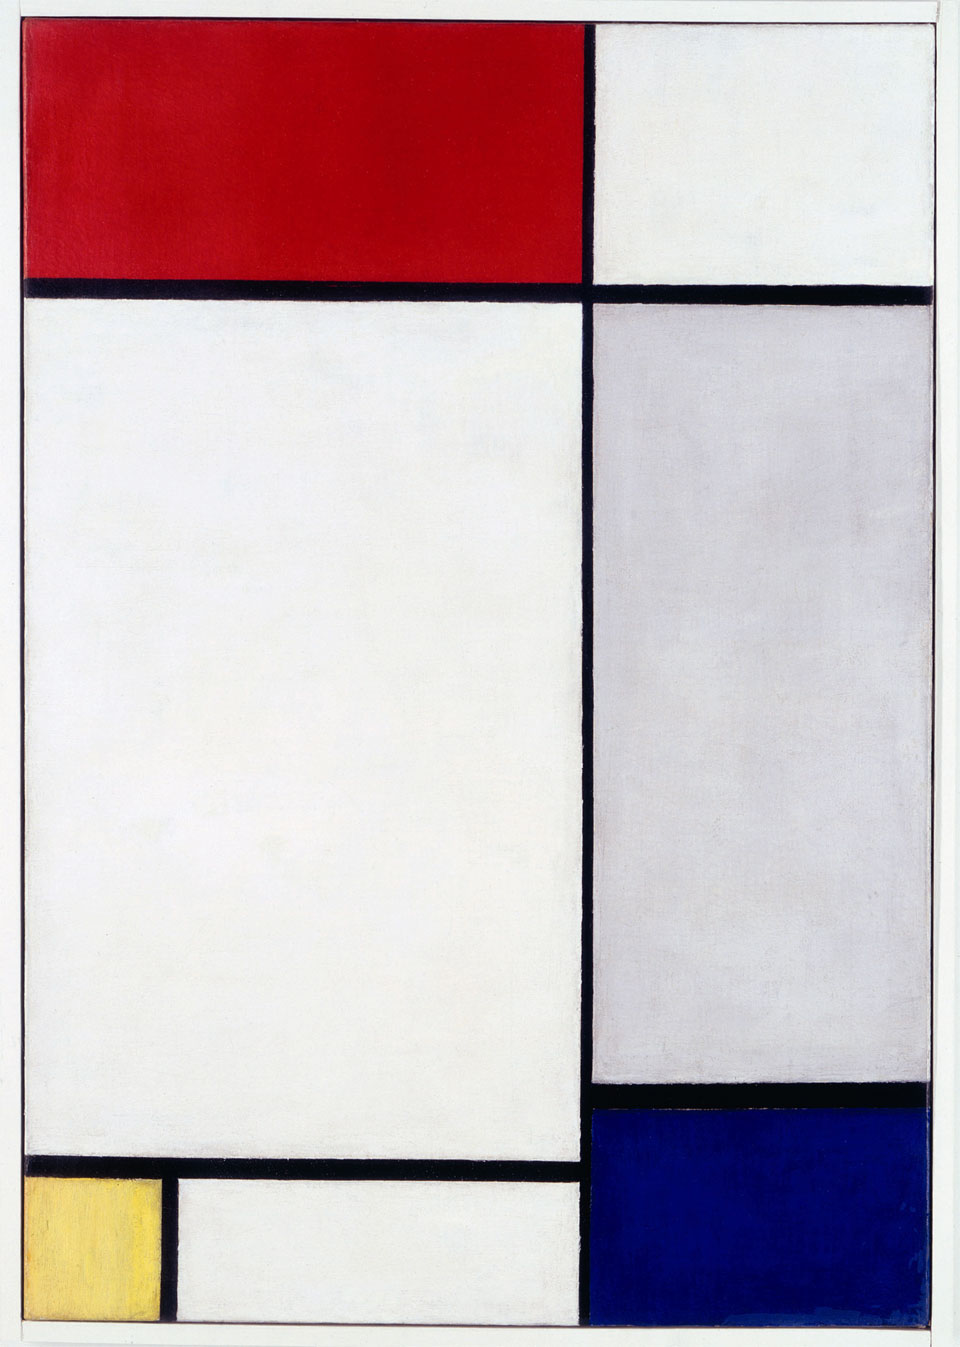 A brief history of abstract art with Turner, Mondrian and more | Tate